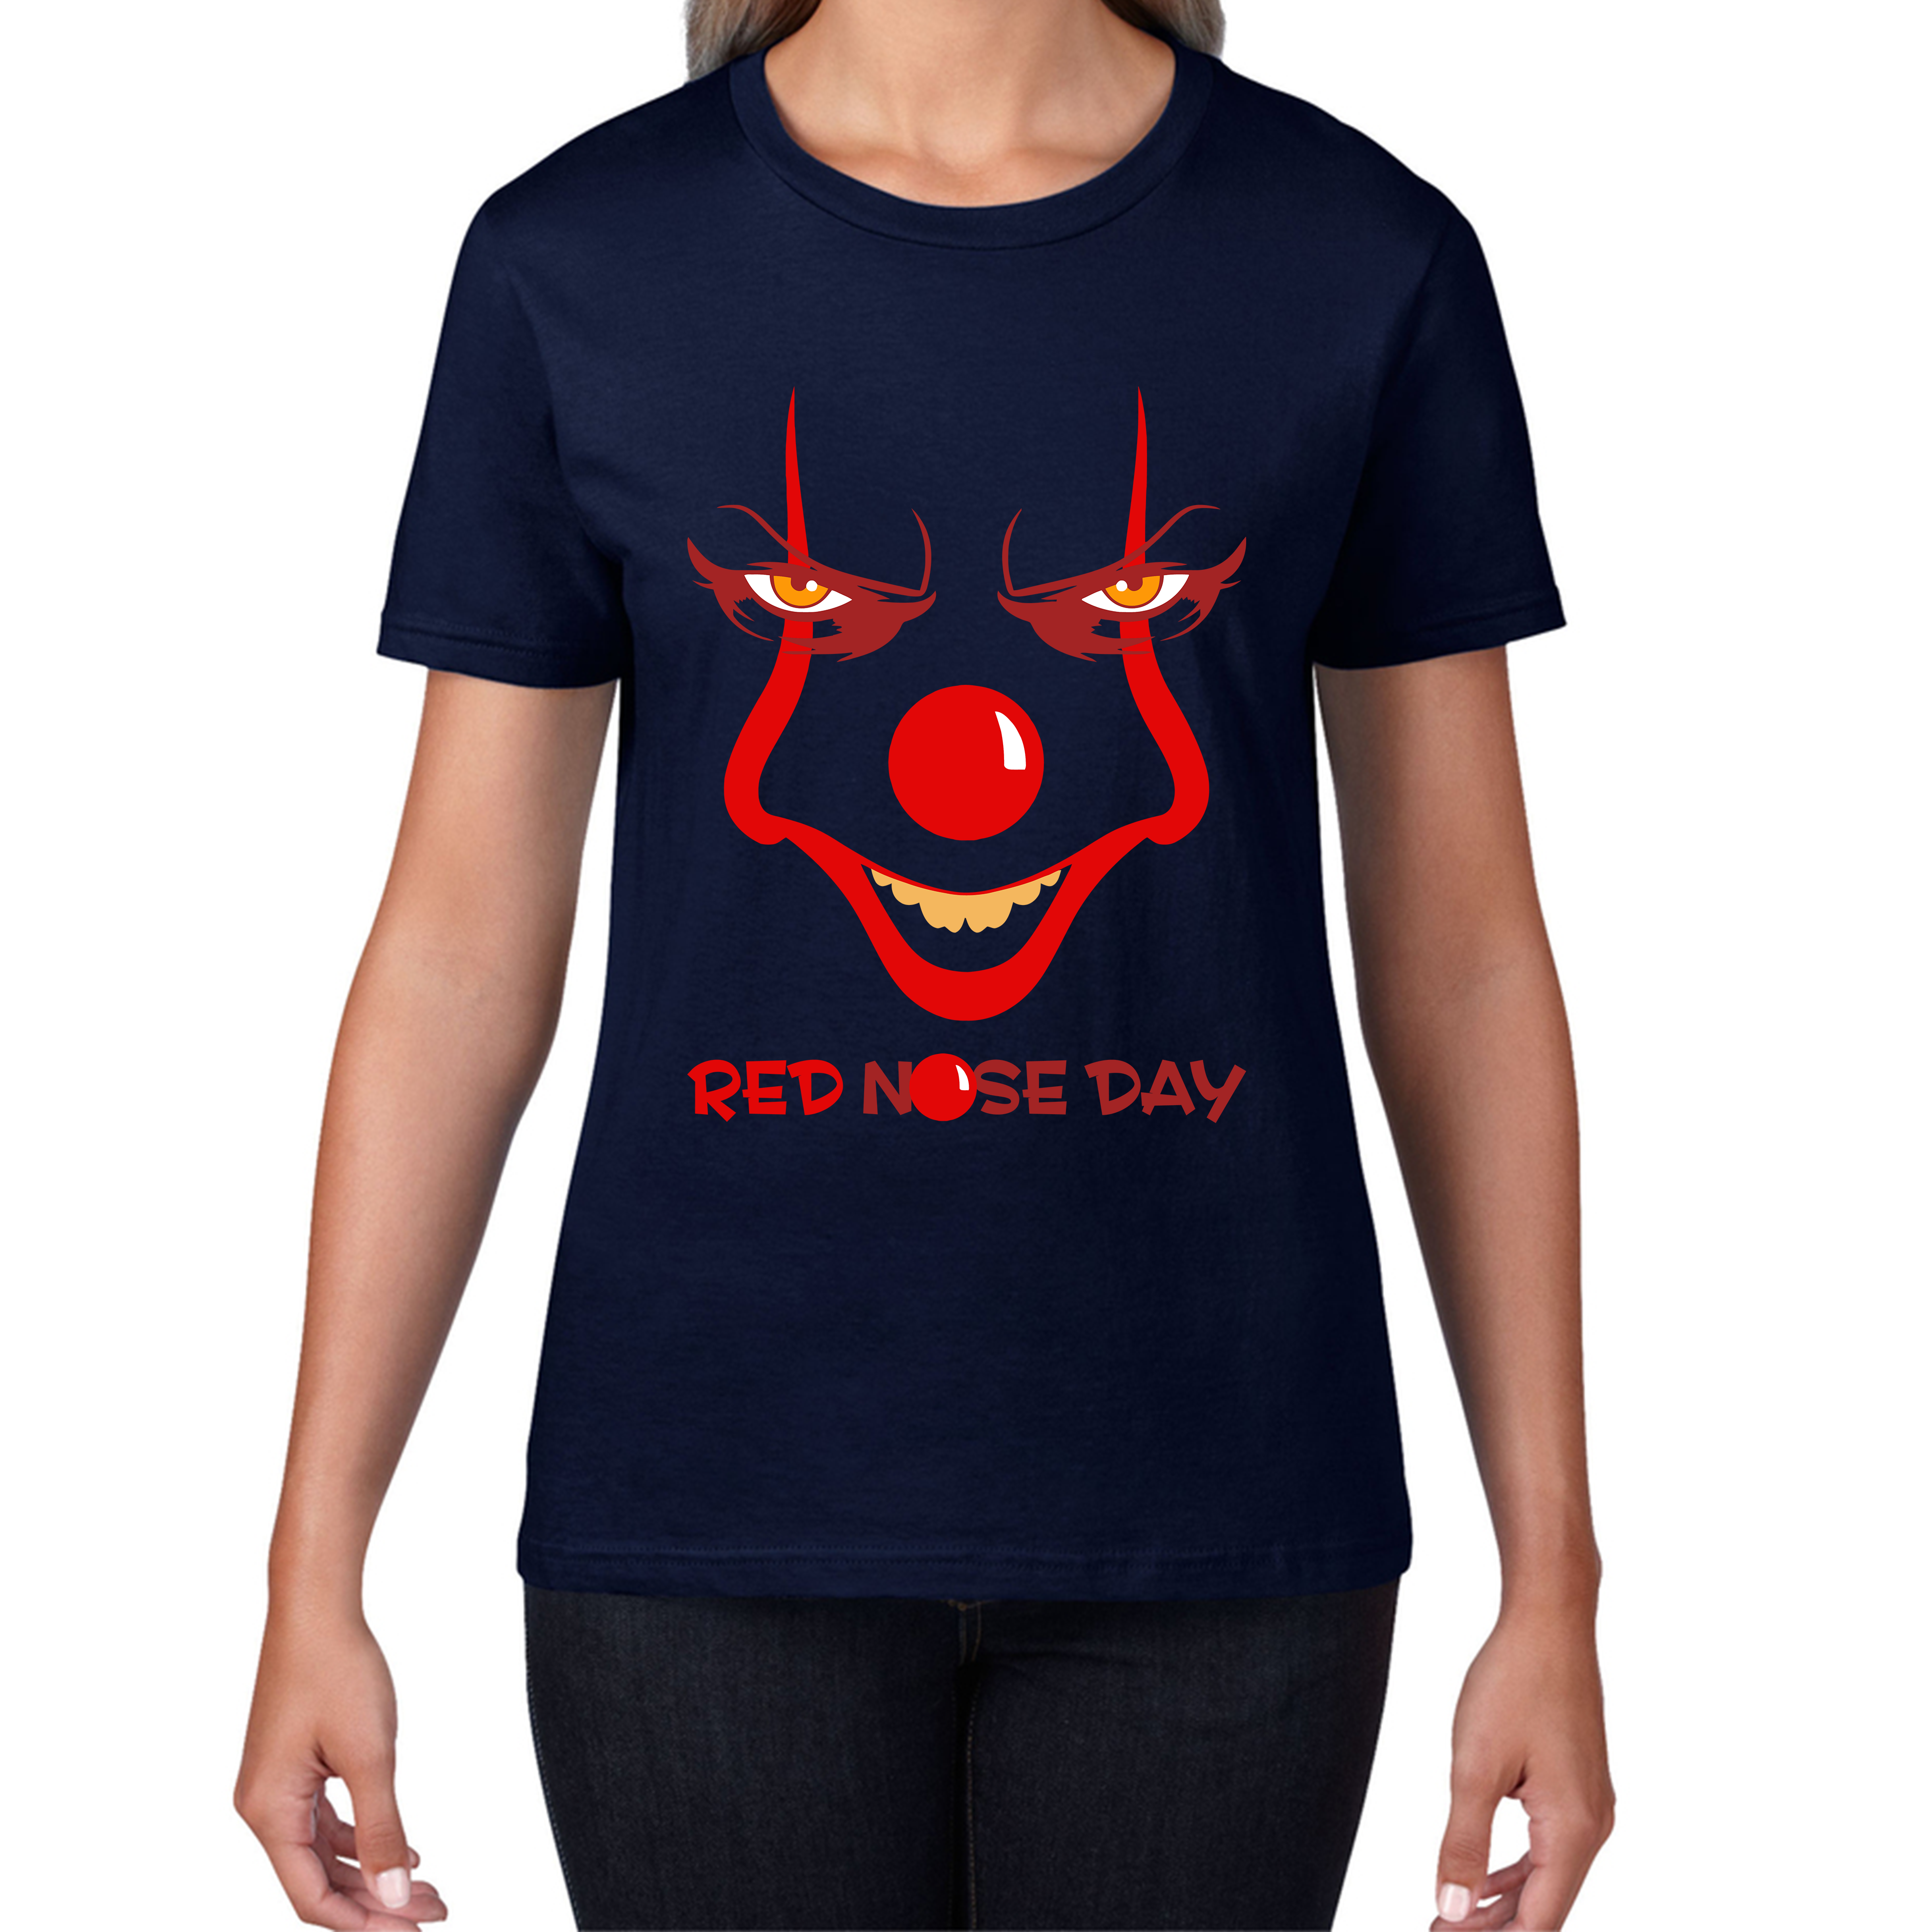 Pennywise Clown Face Red Nose Day Funny Comic Relief Ladies T Shirt. 50% Goes To Charity